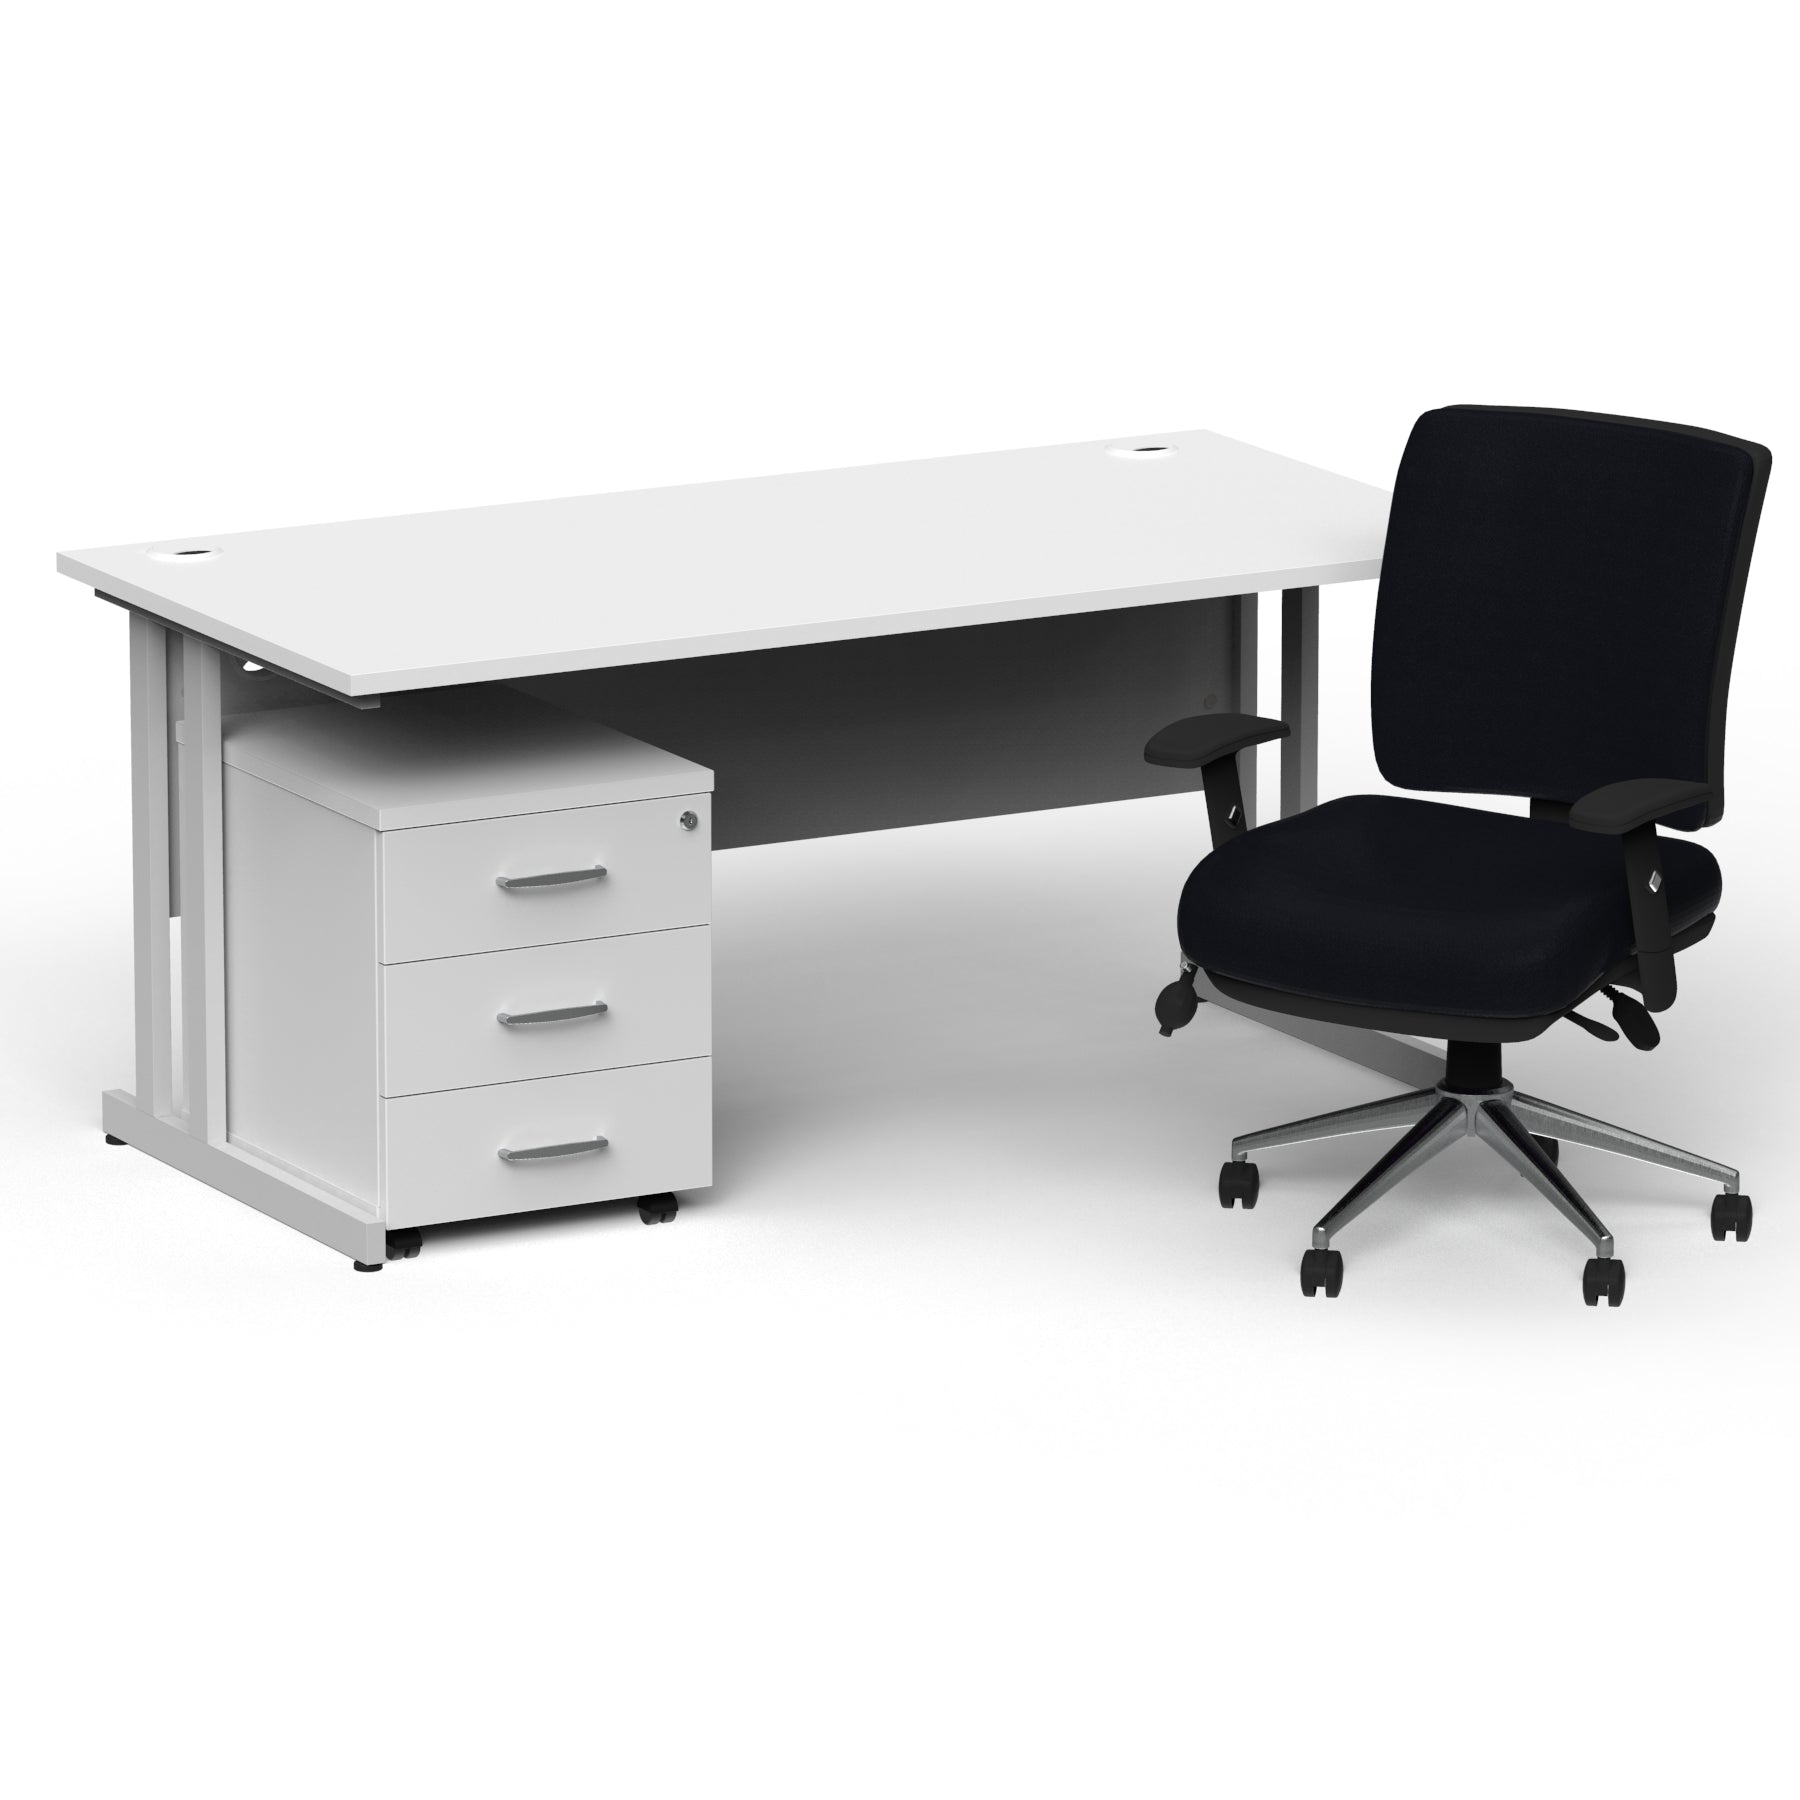 Impulse 1600mm Cantilever Straight Desk With Mobile Pedestal and Chiro Medium Back Black Operator Chair